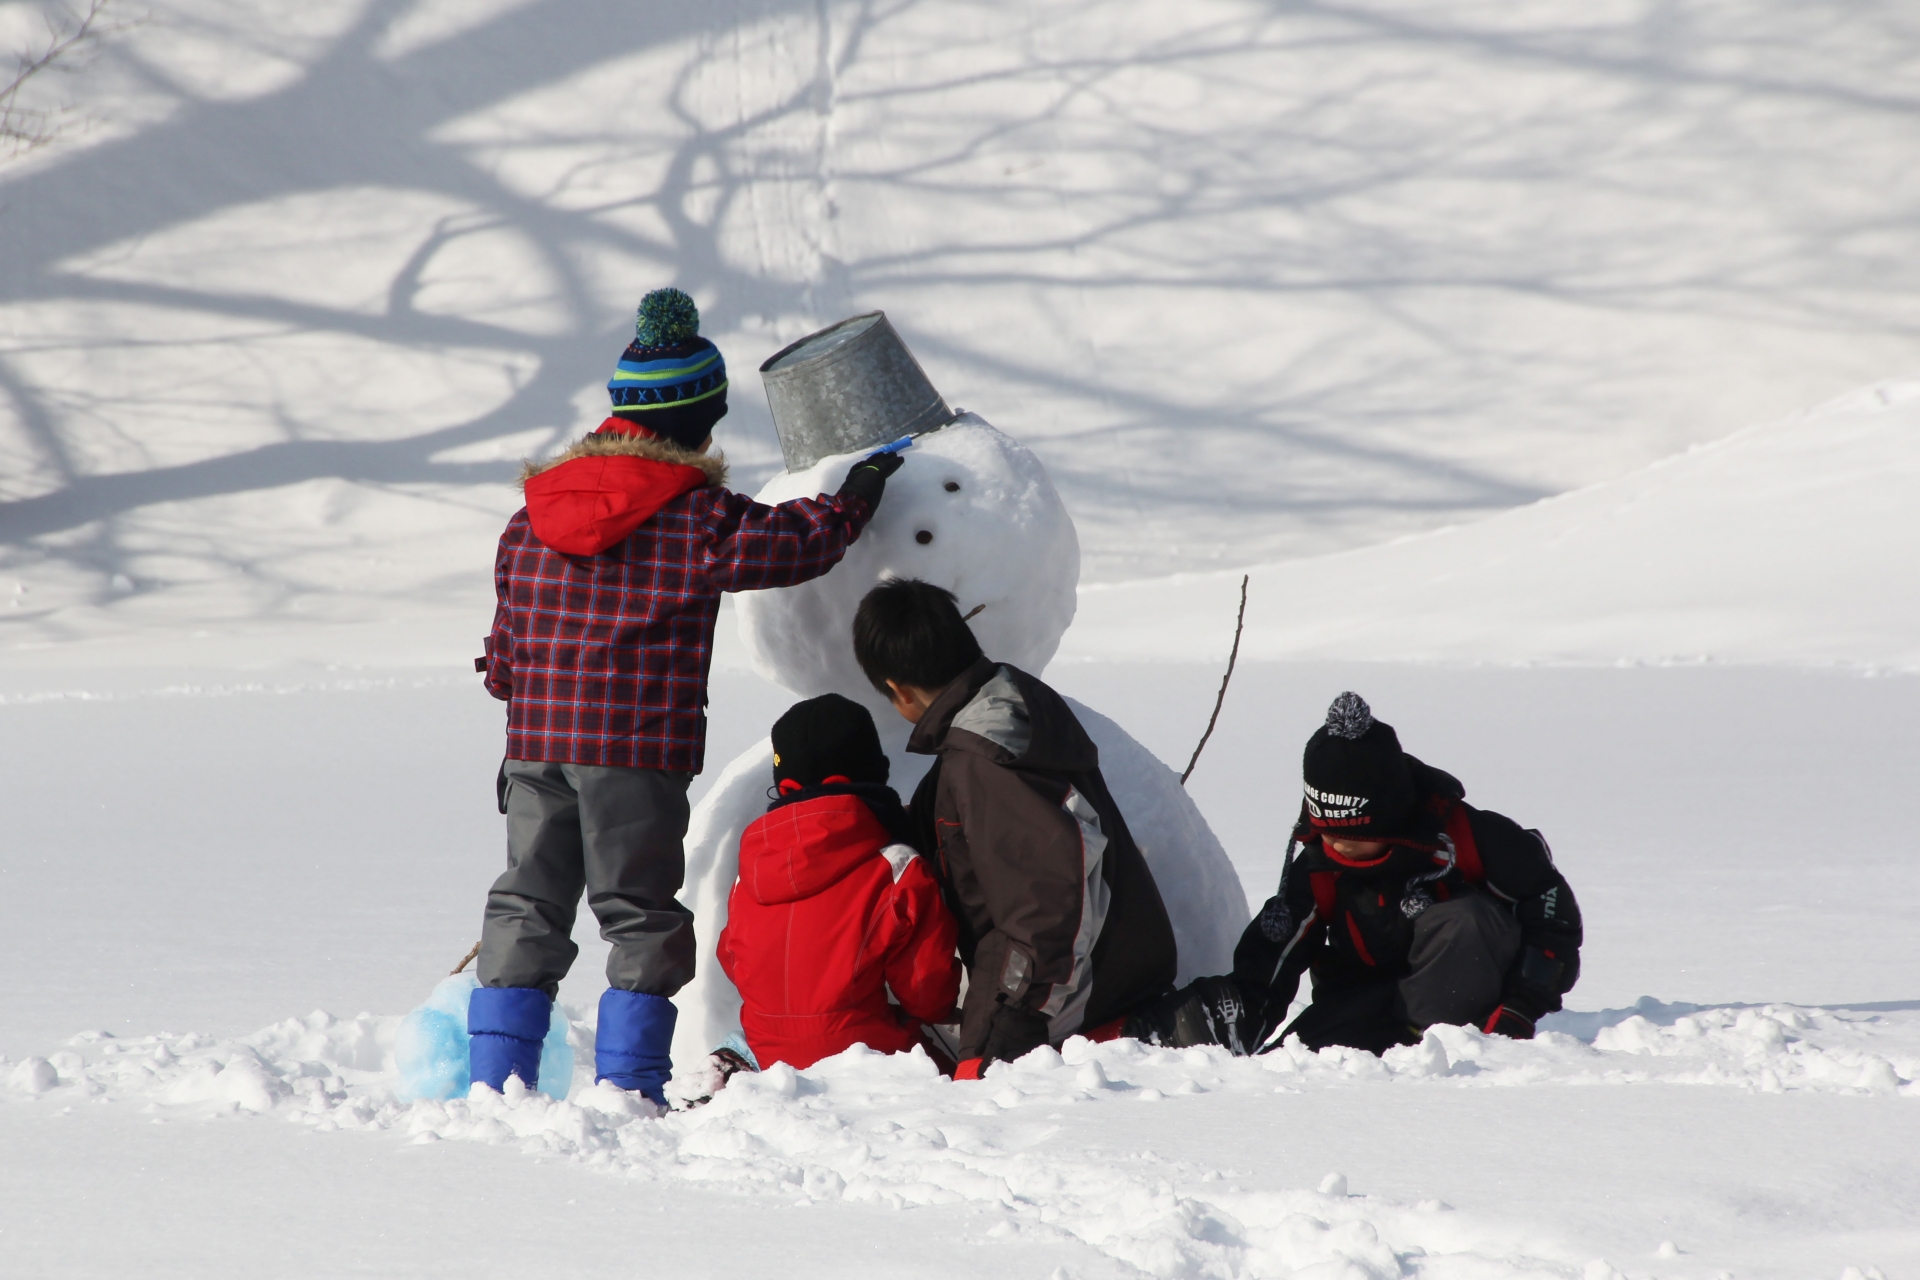 Some kids are making a snow man on the snow field.